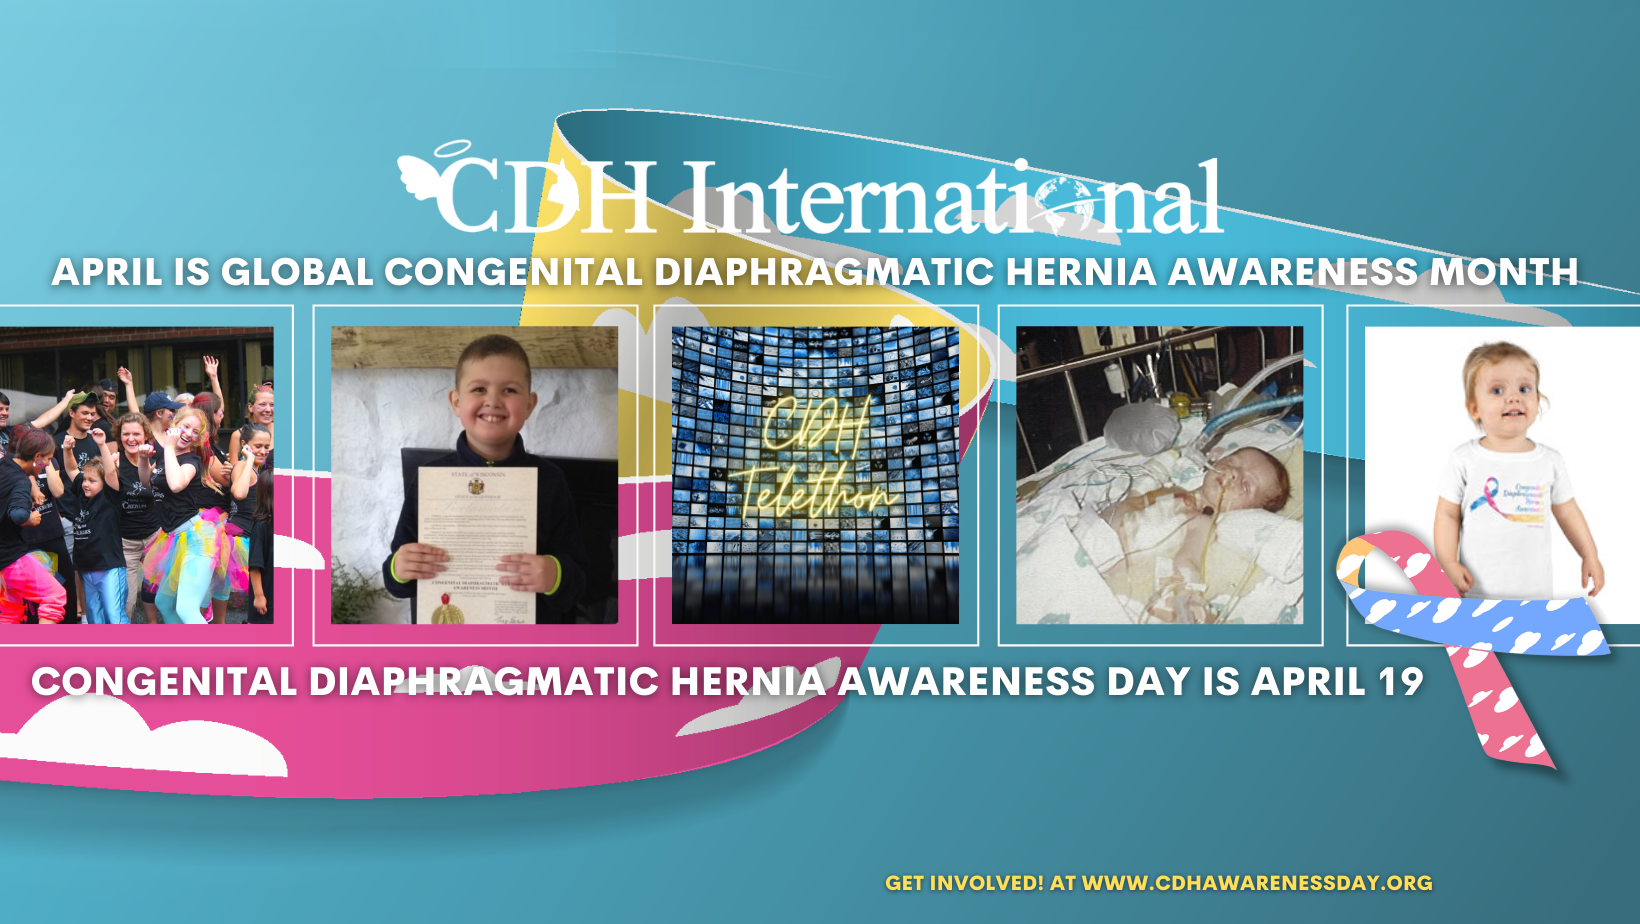 Research: Congenital paraesophageal hernia with gastric outlet obstruction in a neonate with Cornelia de Lange Syndrome